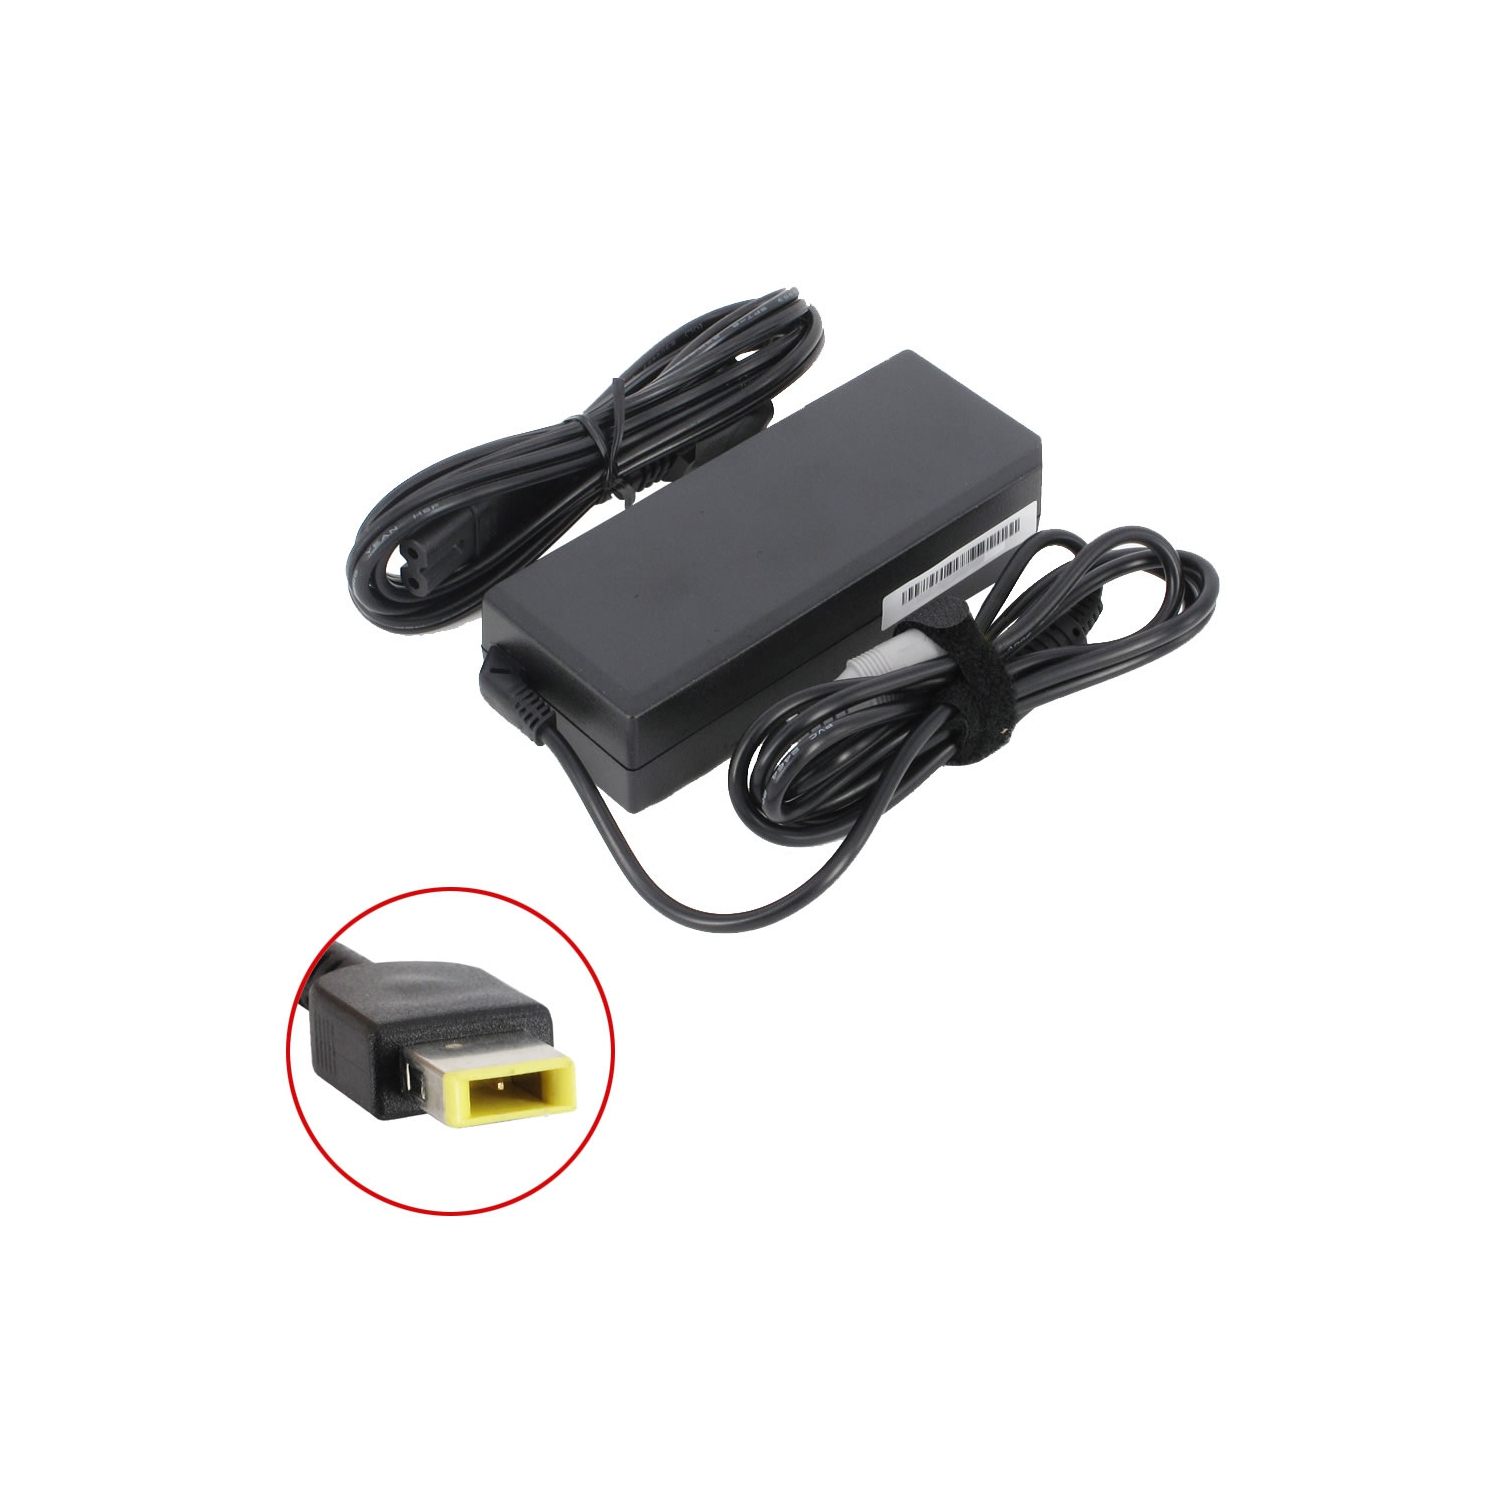 Brand New Laptop AC Adapter for Lenovo IdeaPad 500-15ISK, ADP-65XB A, 0B47481, 45N0293, 45N0482, PA-1650-37LF